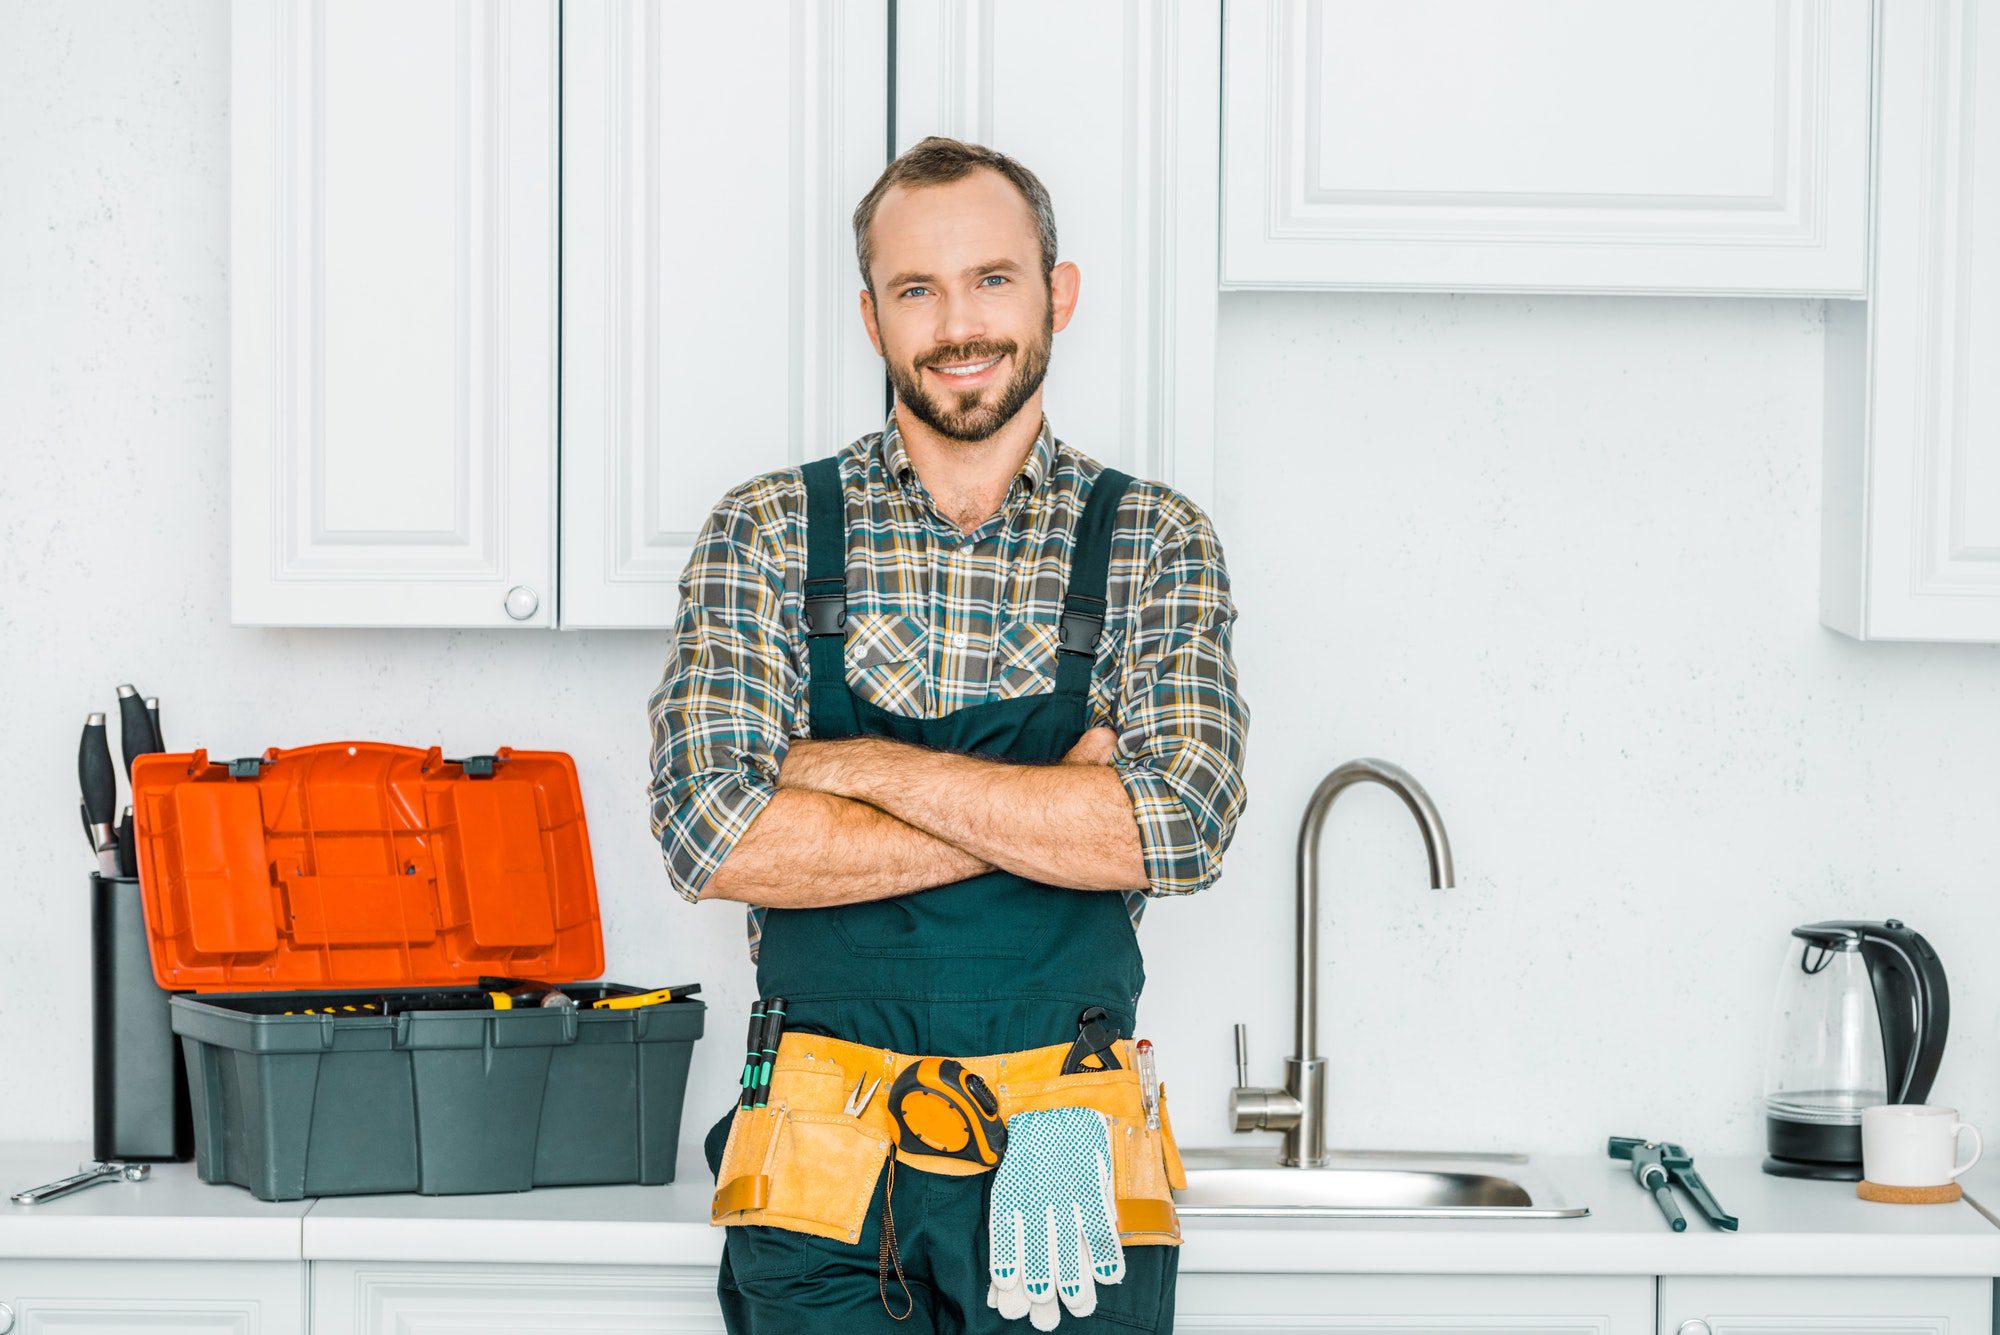 smiling-handsome-plumber-standing-with-crossed-arms-and-looking-at-camera-in-kitchen.jpg